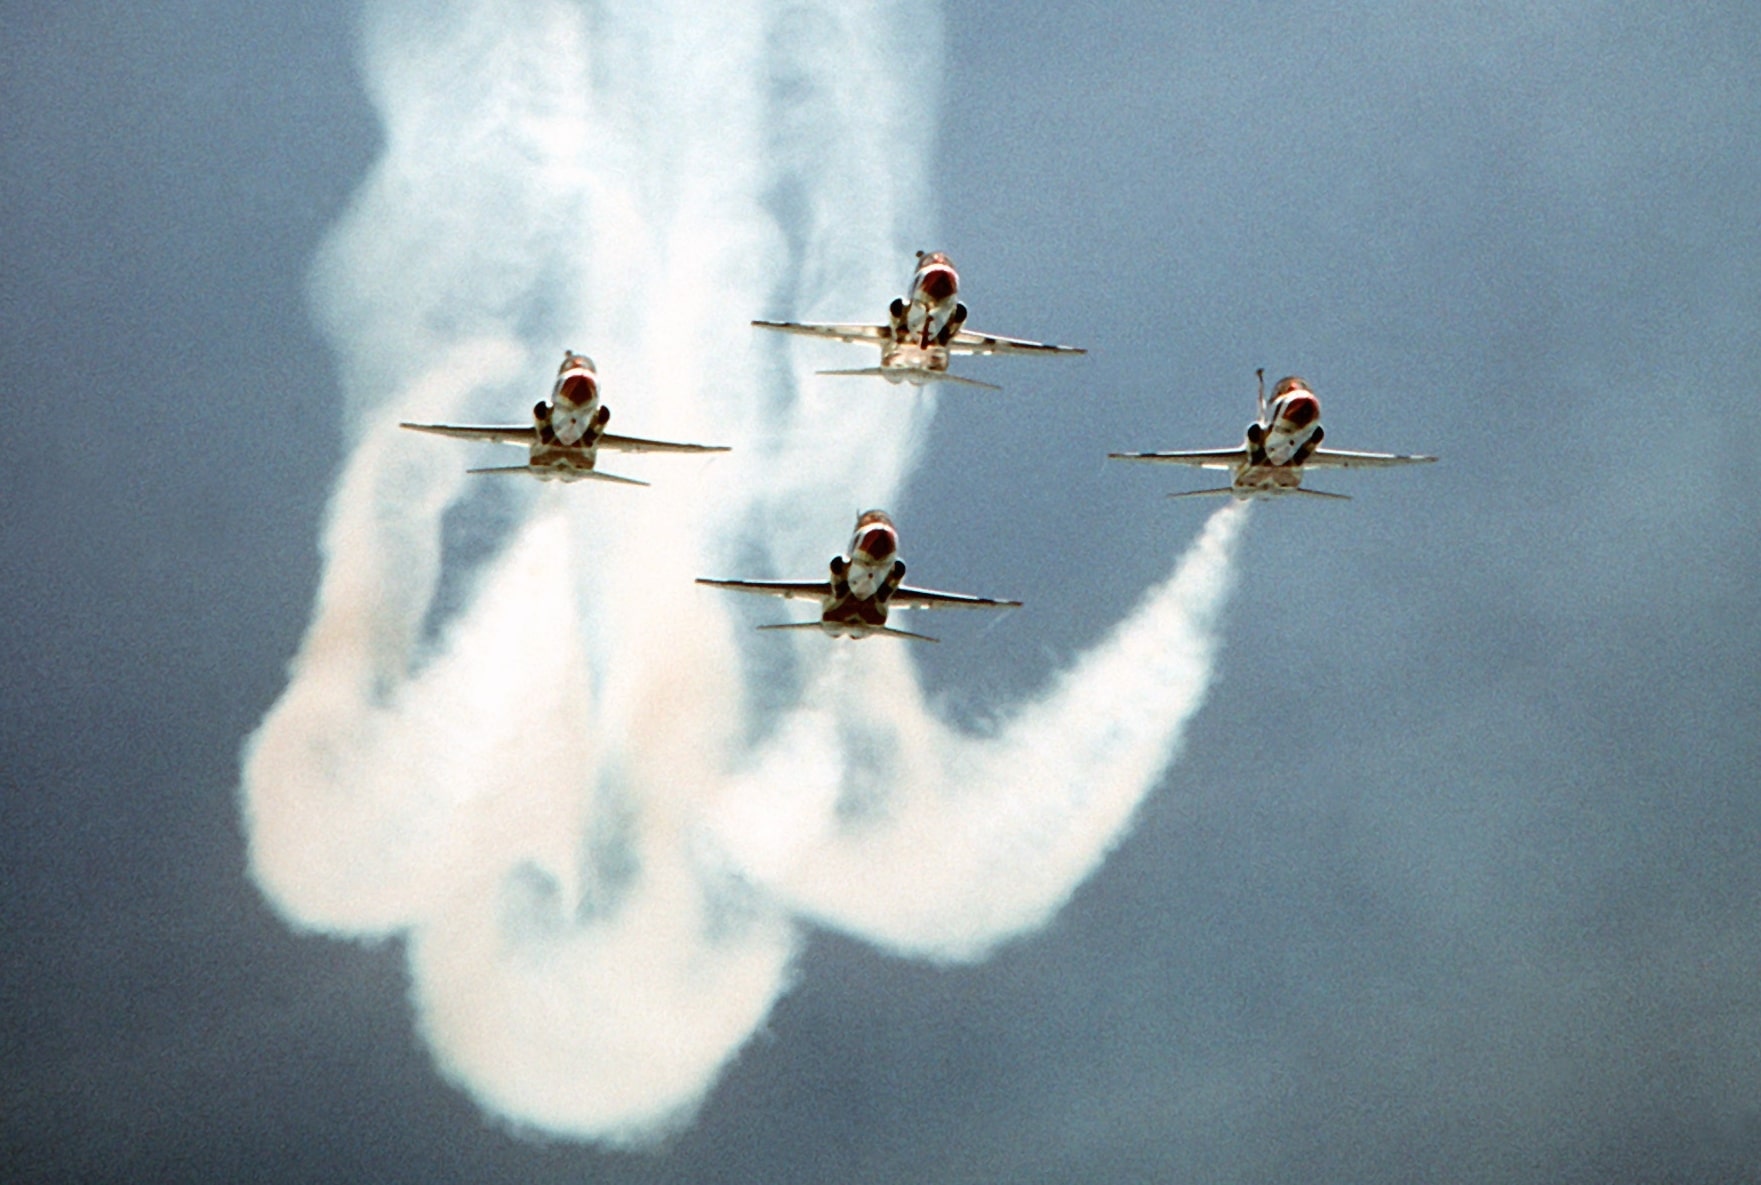 Thunderbirds perfoming a formation.